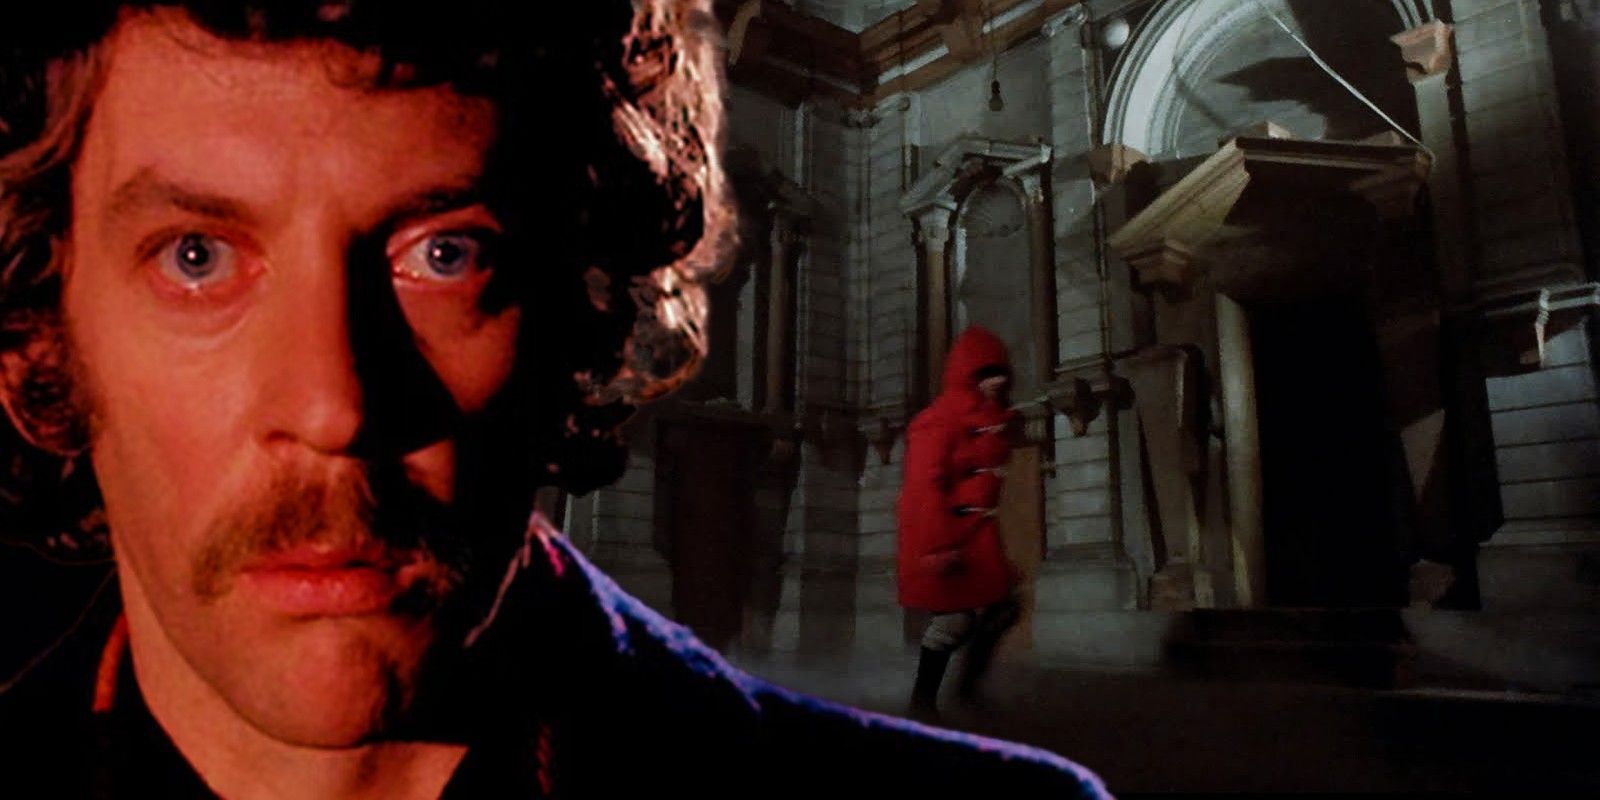 Custom image of Donald Sutherland as John Baxter and the figure in the red coat in Don't Look Now